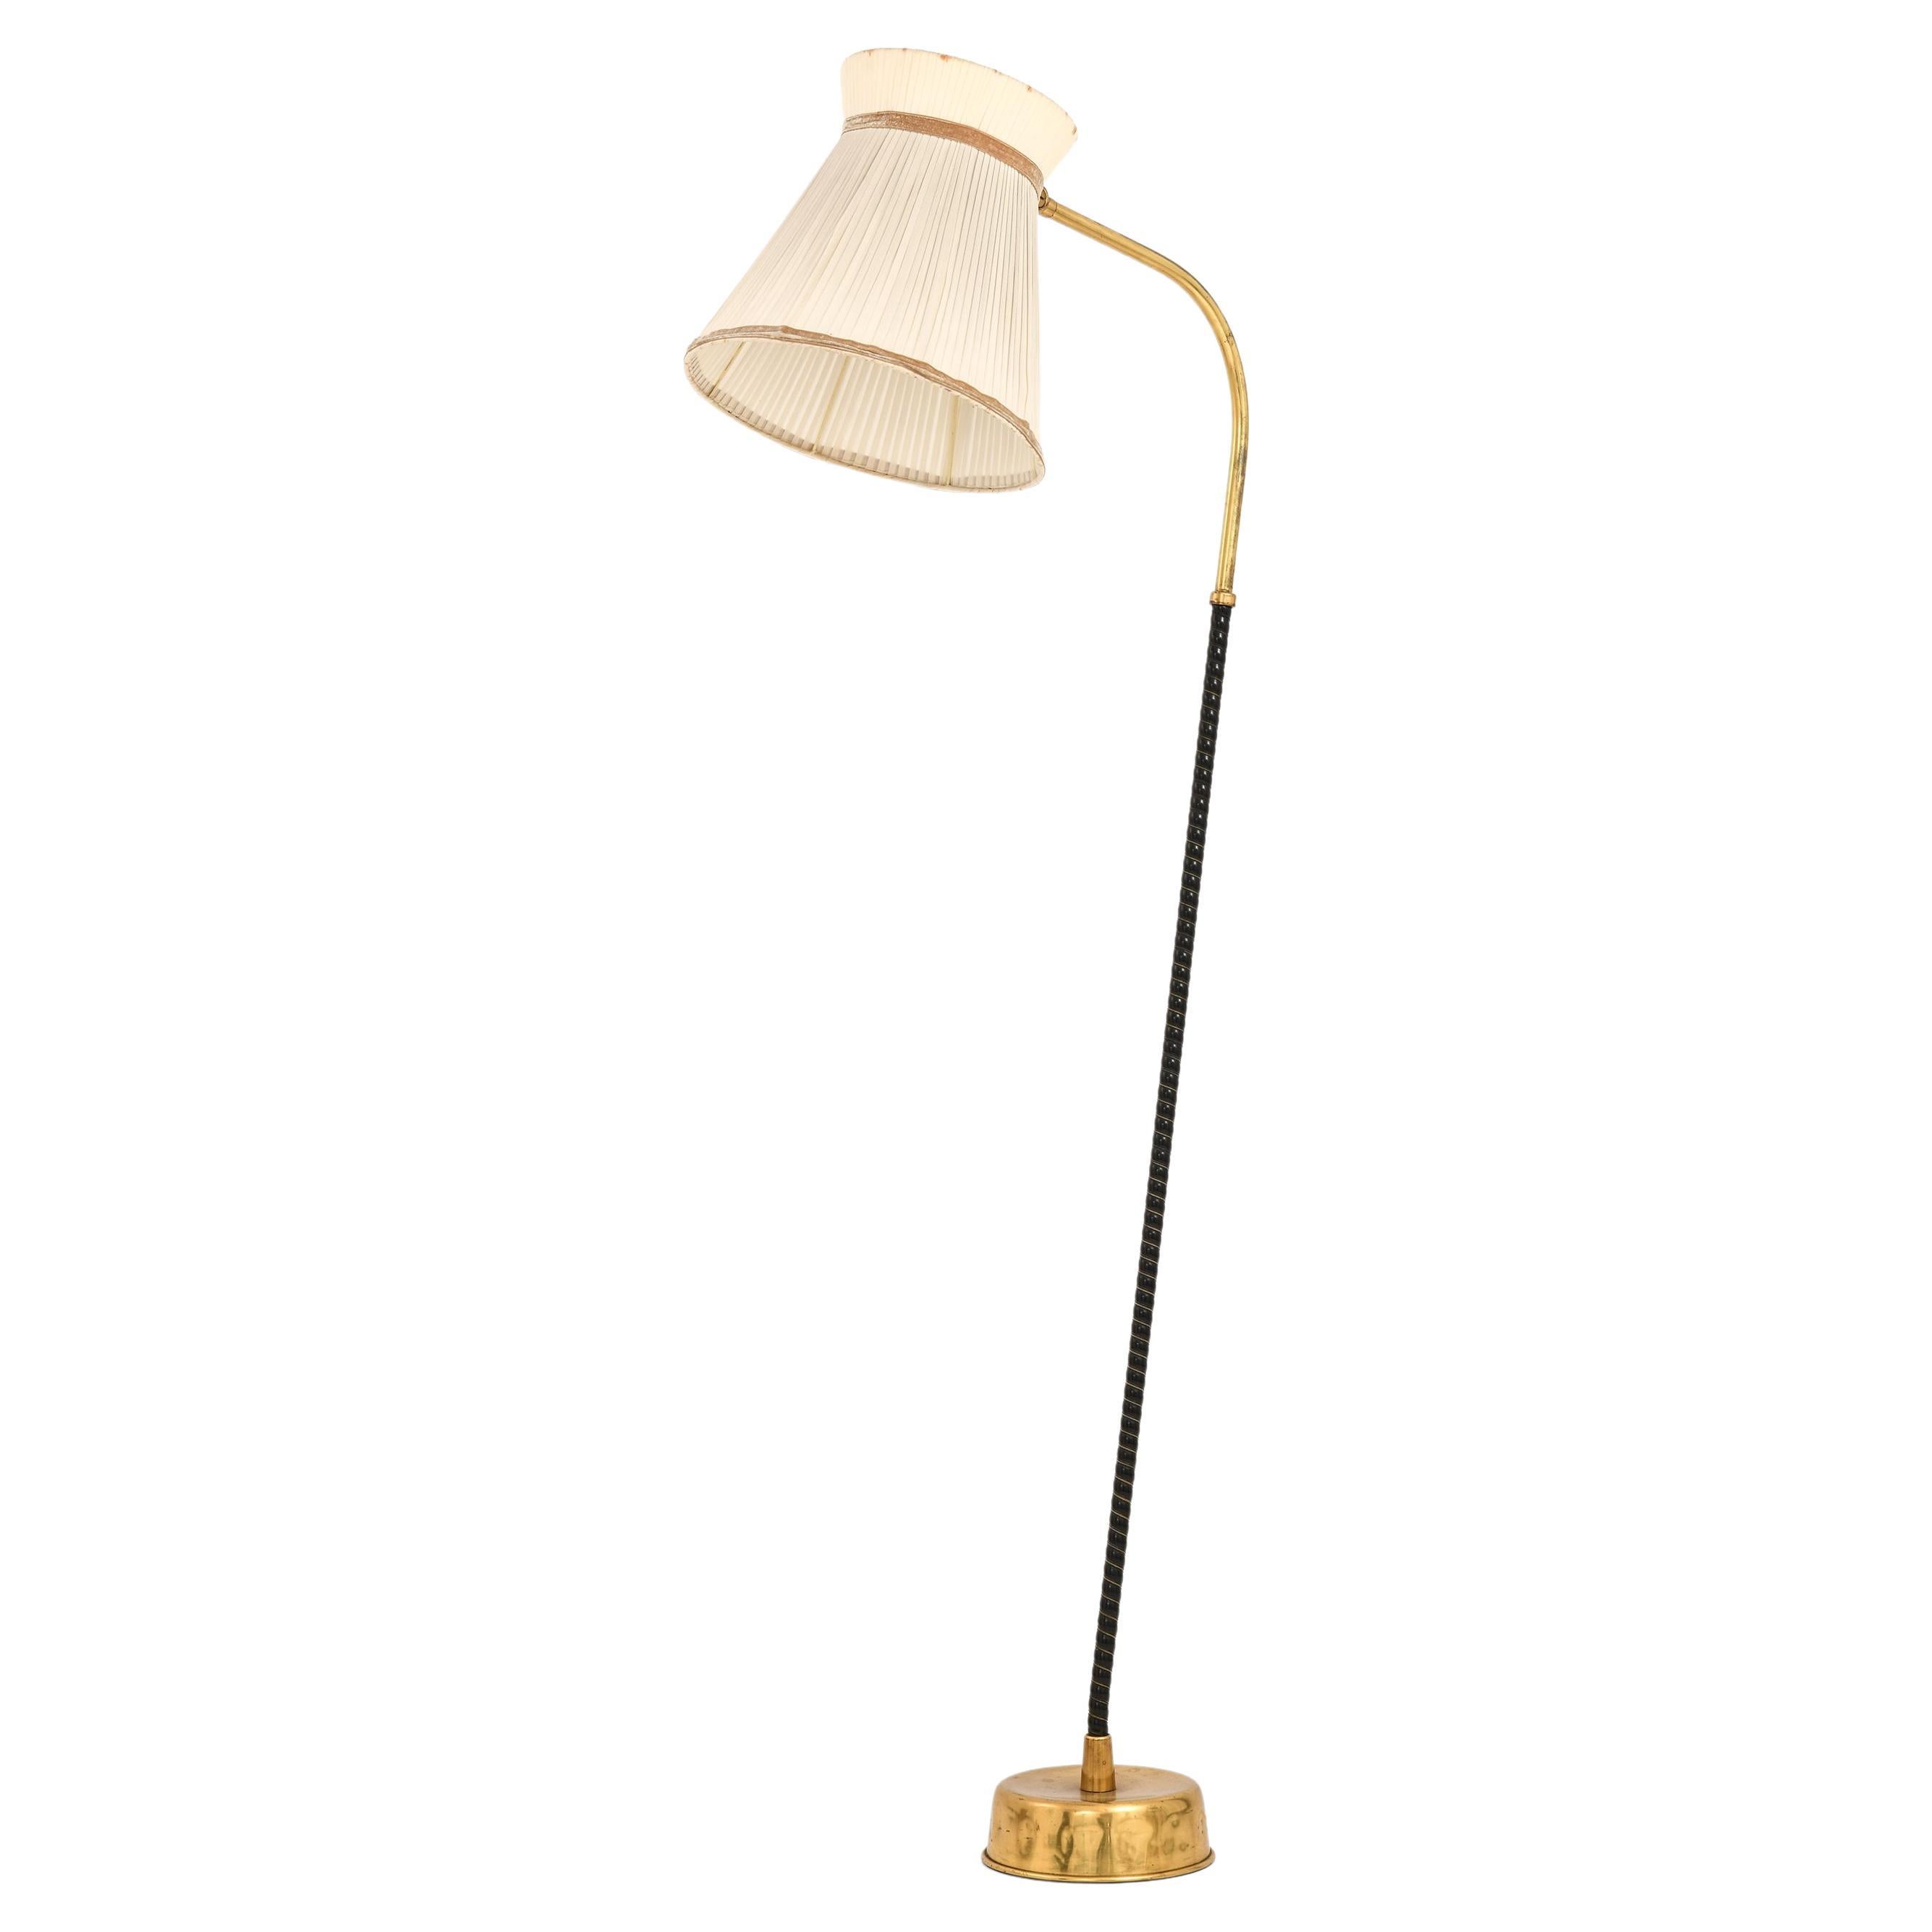 Floor Lamp in Brass, Leather and Linen Shade by Lisa Johansson-Pape, 1940’s